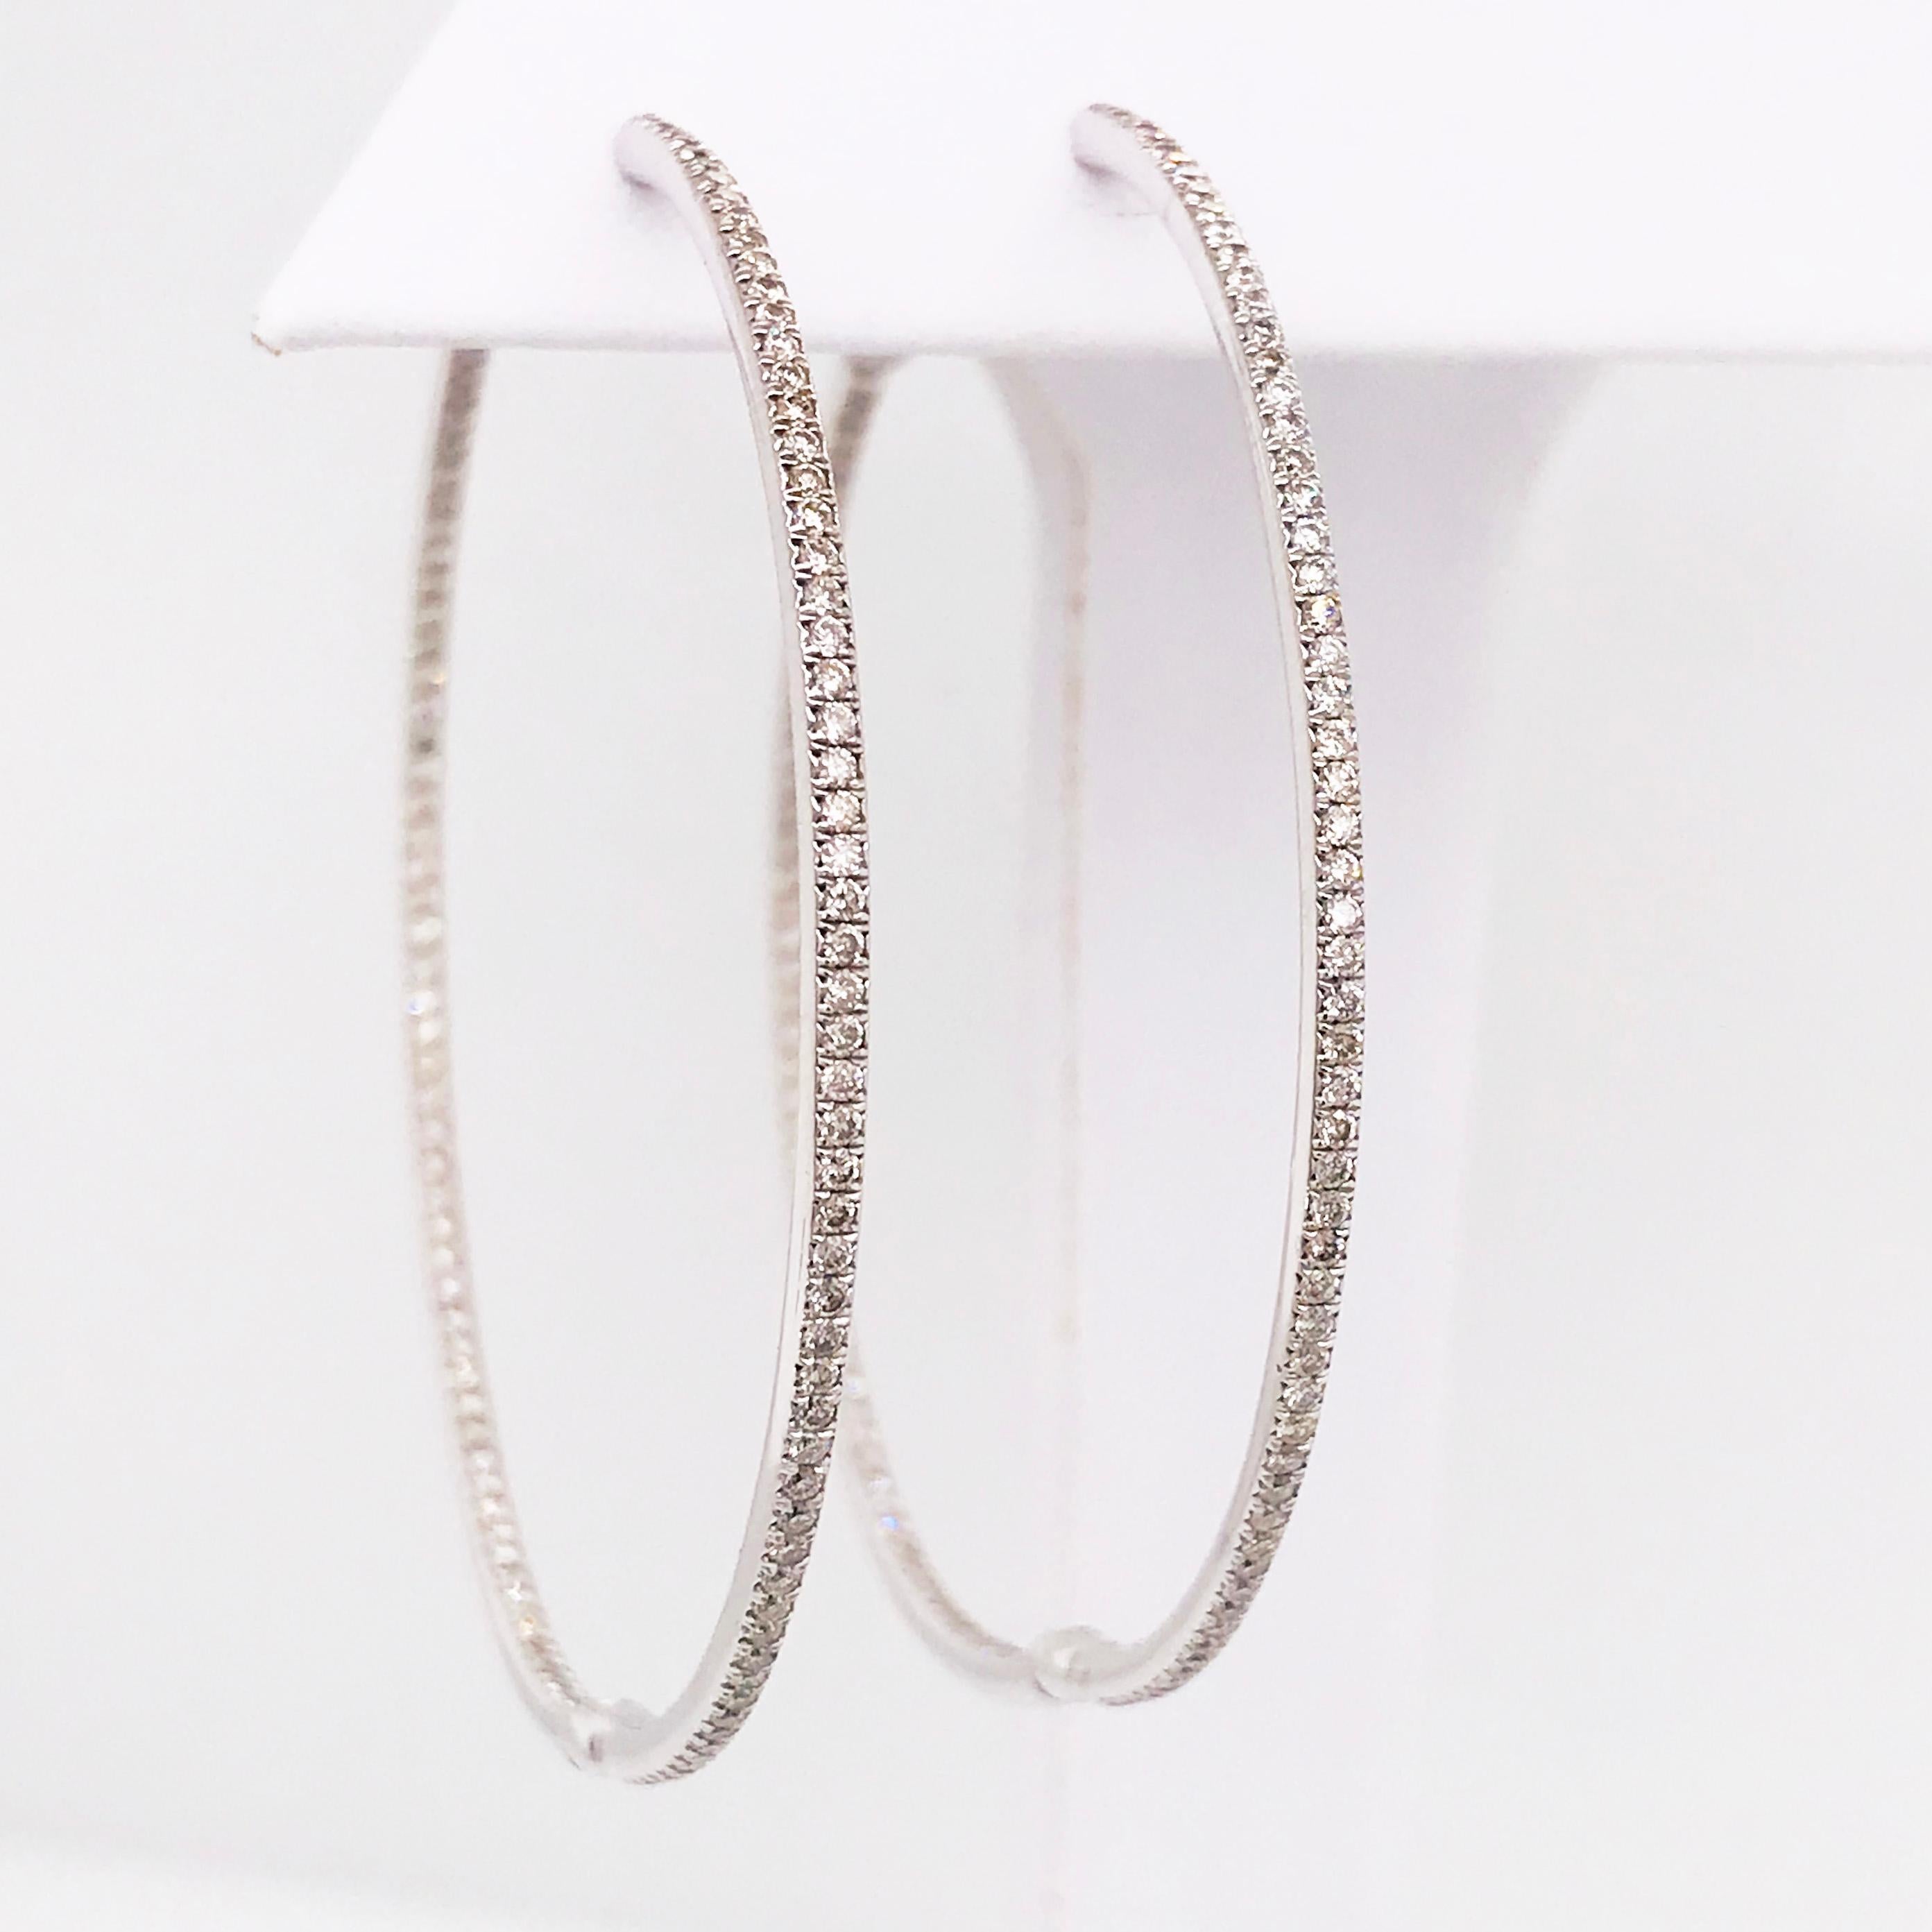 Sassy, sexy, fun and fabulous! These large diamond hoop earrings are to die for! These diamond inside out hoops are a staple in any fine jewelry collection. The 2 inch diameter is a perfect size for any occasion. They can be worn casually or for a